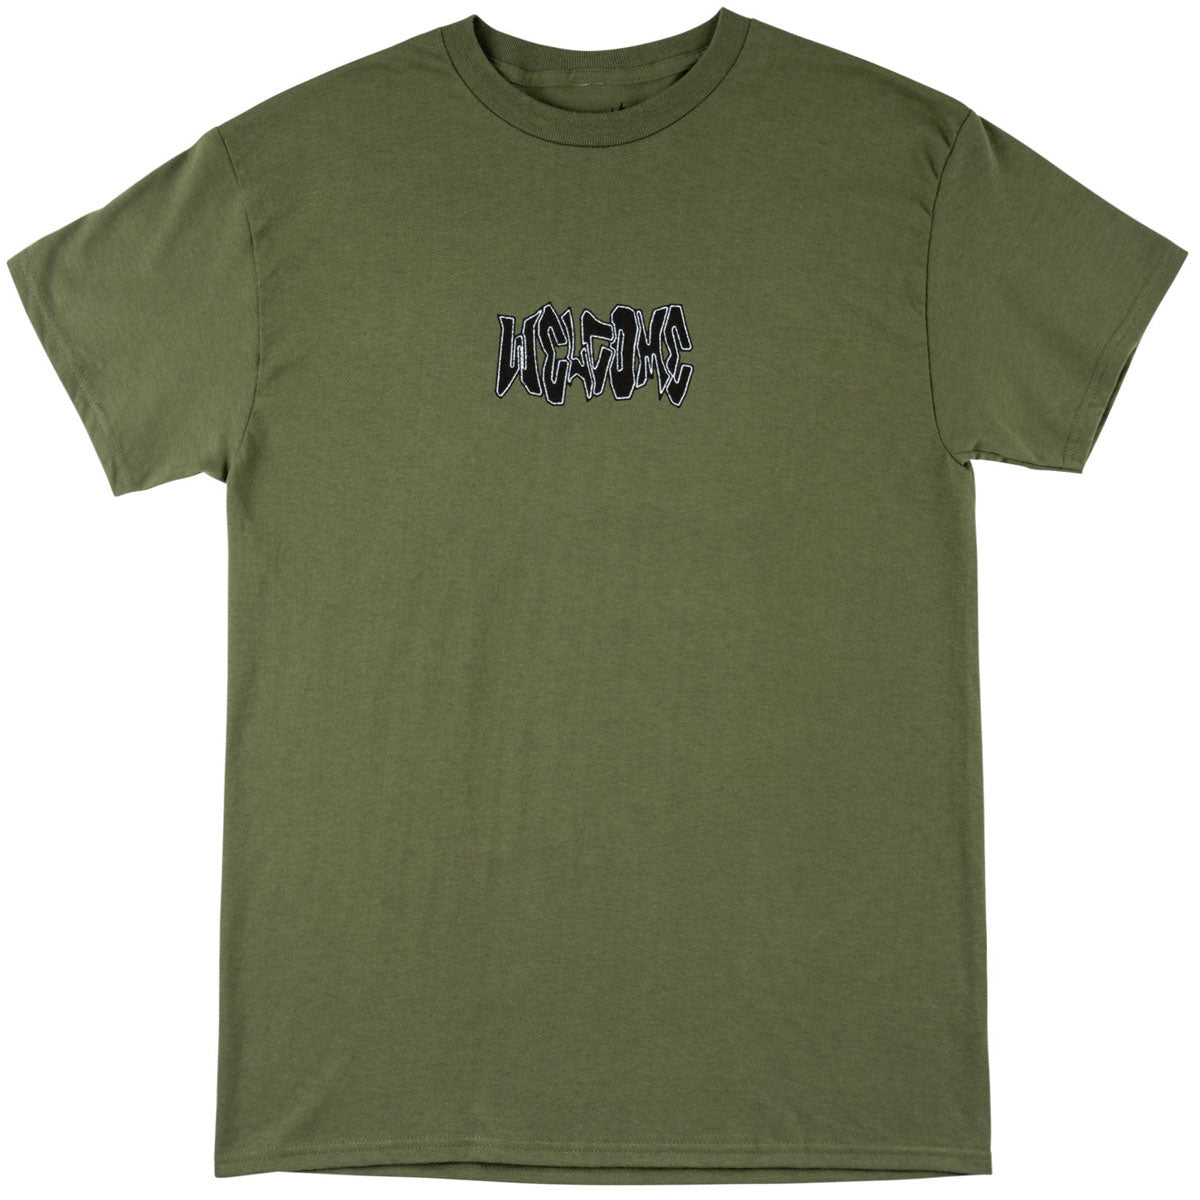 Welcome Nephilim T-Shirt - Olive image 2